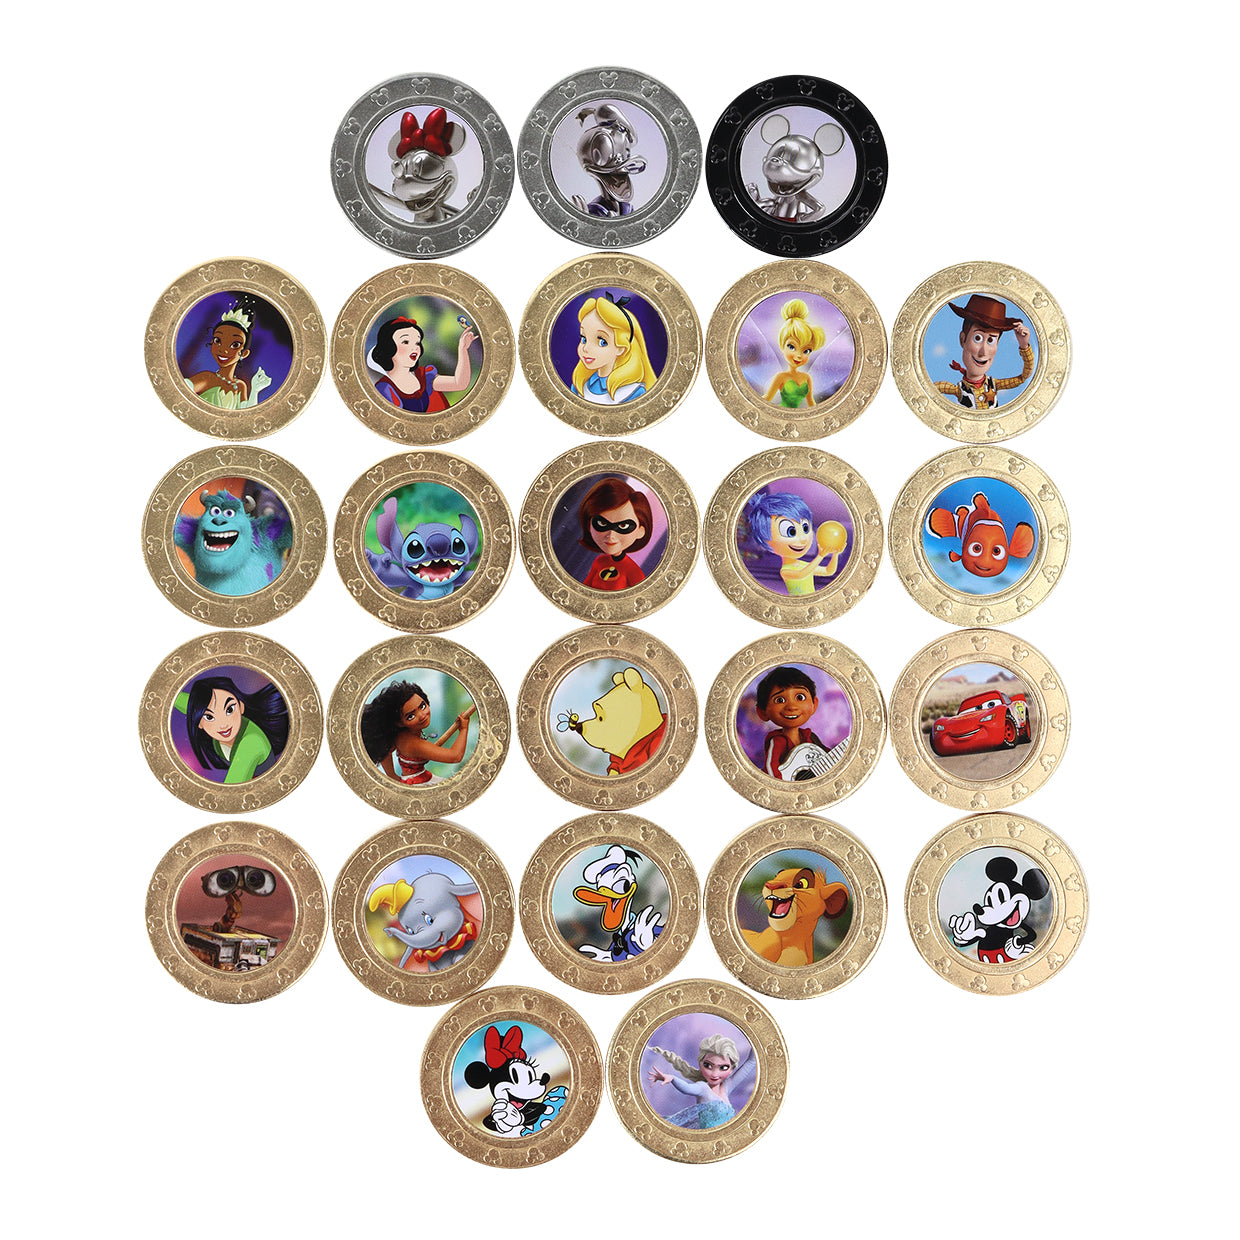 all the 25 different disney 100 coins you can collect showing each character